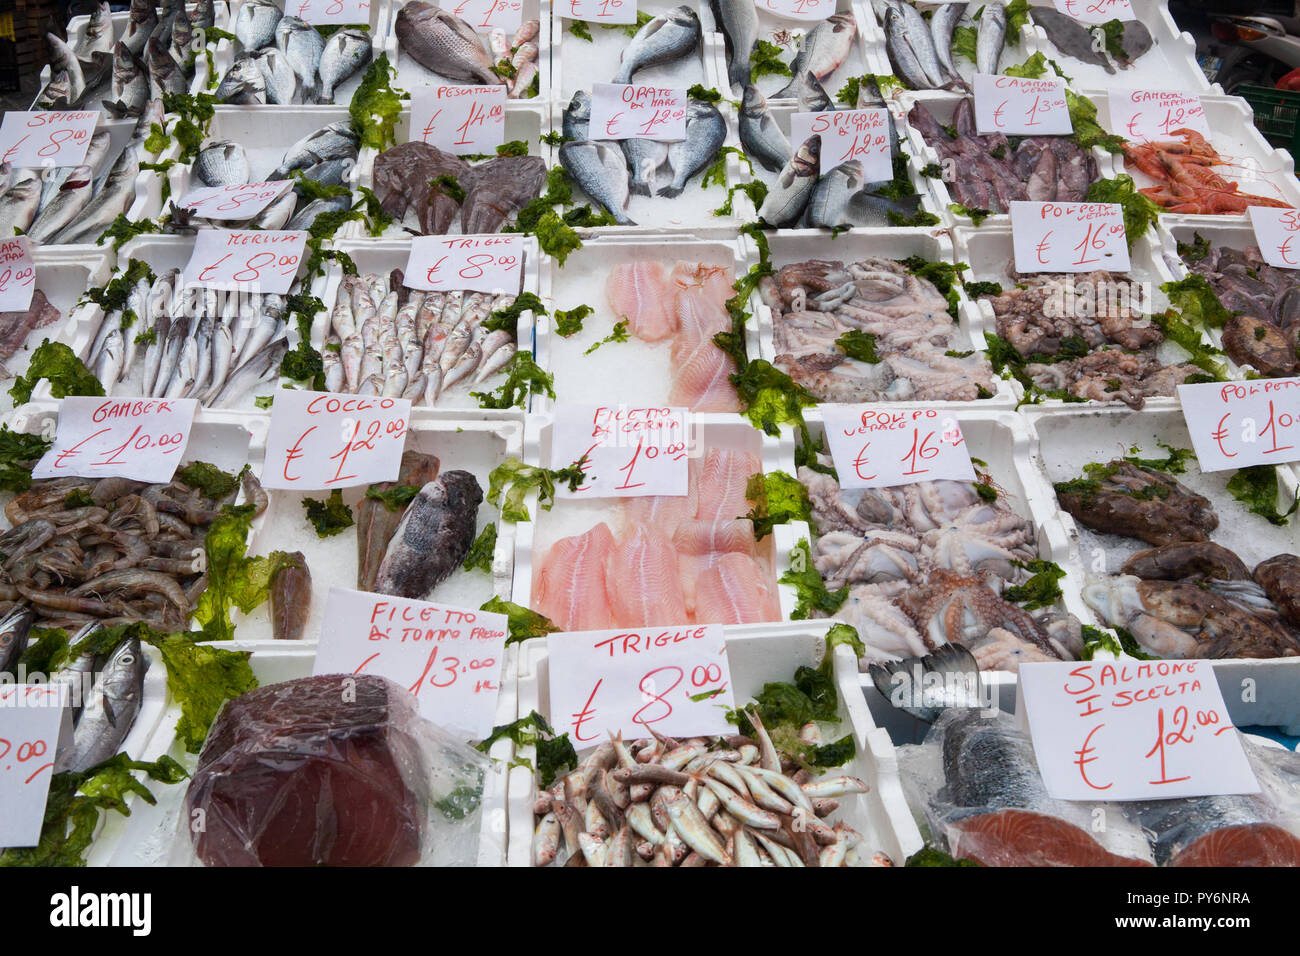 Display of fish for sale in a street market in Naples Stock Photo